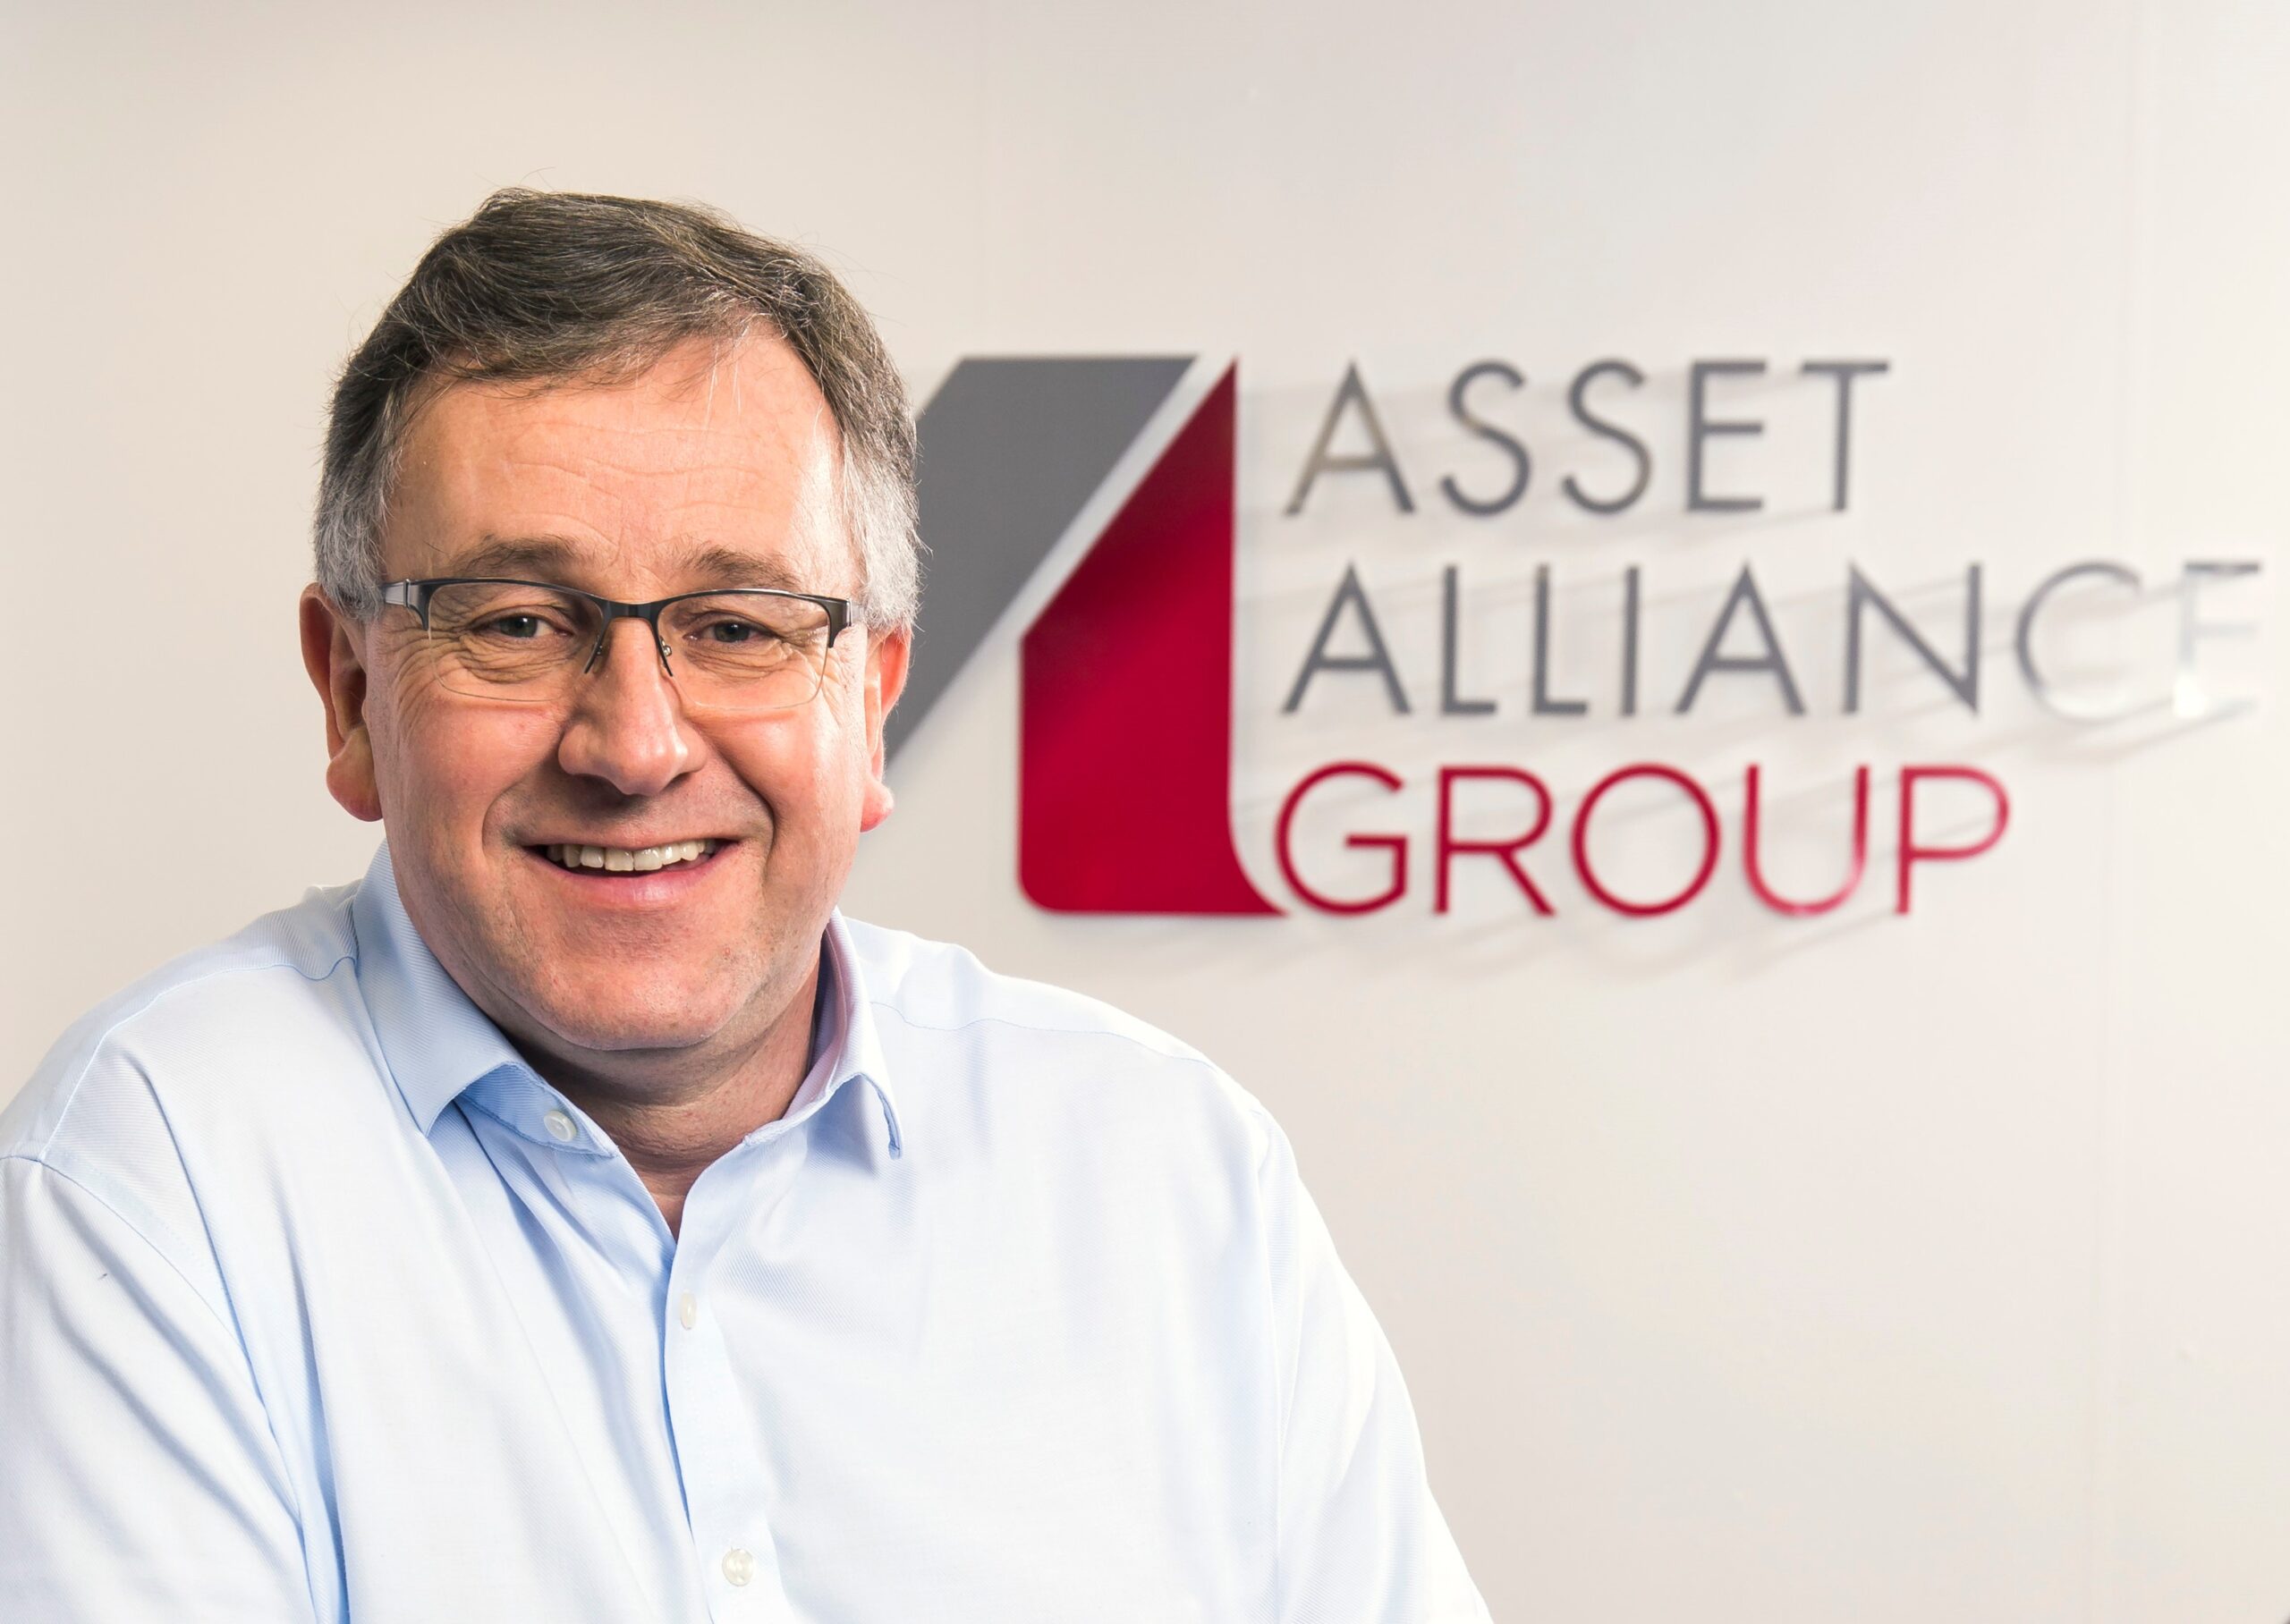 Asset Alliance Group’s three-way deal during the pandemic